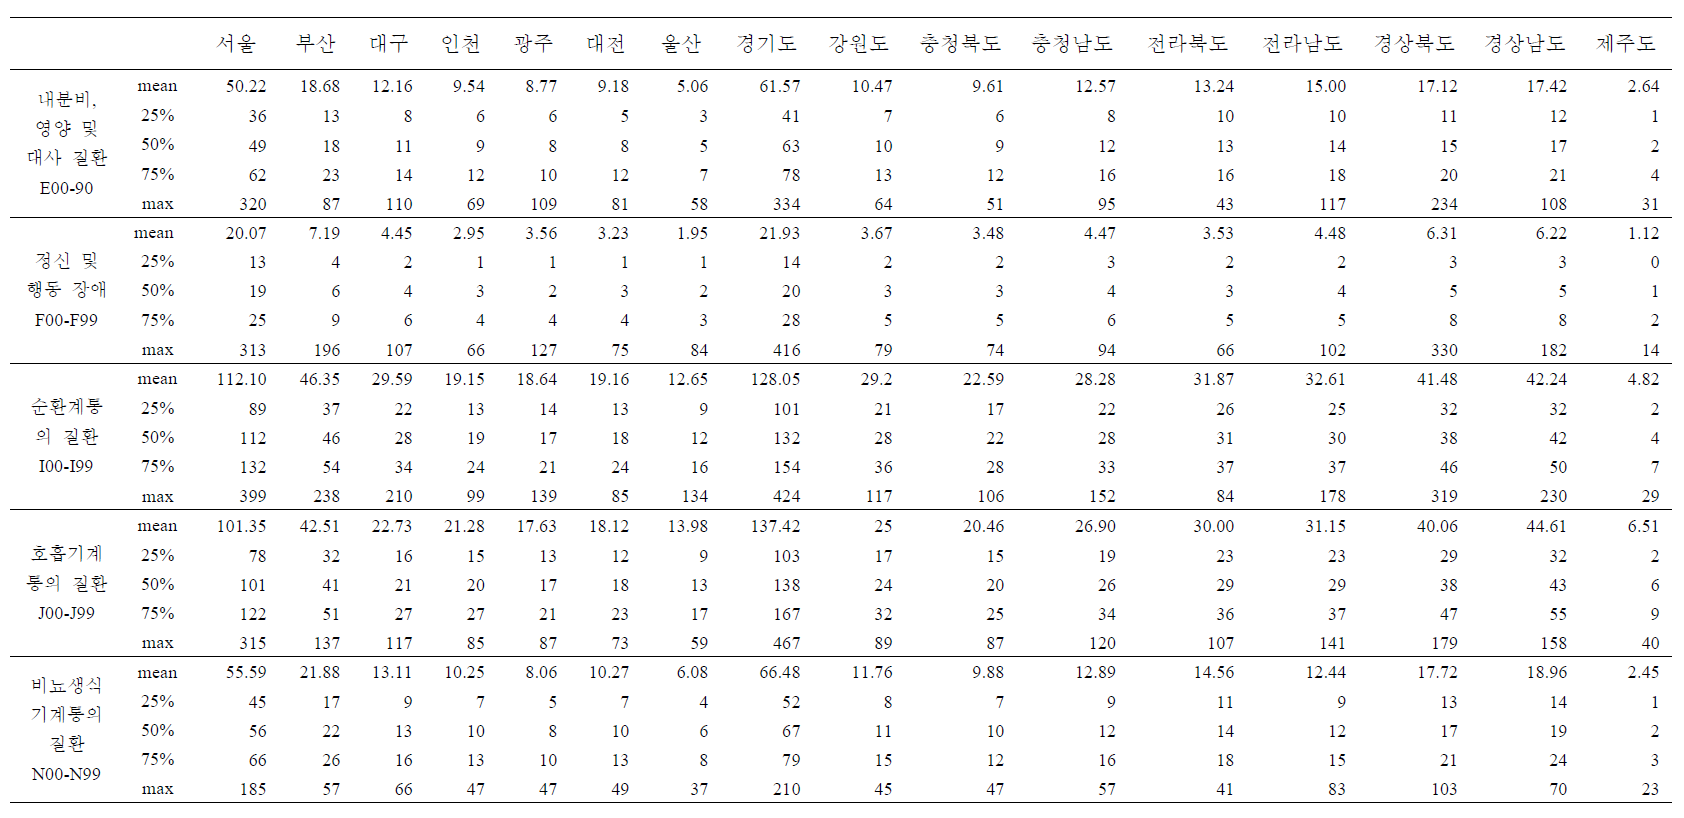 Distribution of hospital admissions counts through ER visit by districts (2003~2013년)